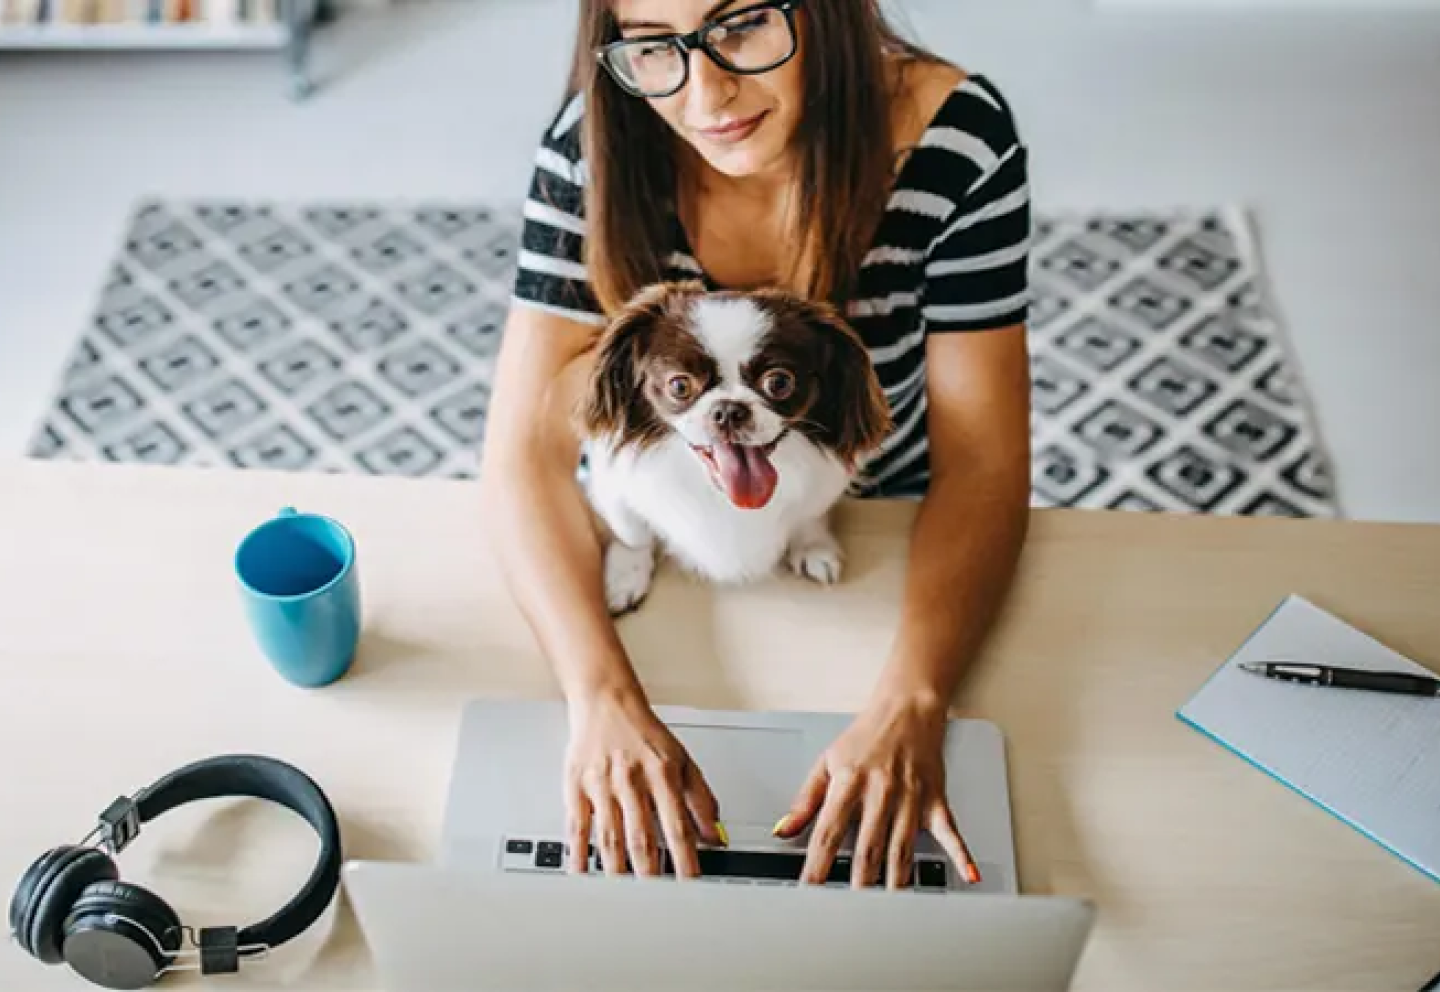 A woman working on a laptop with a dog on her lap